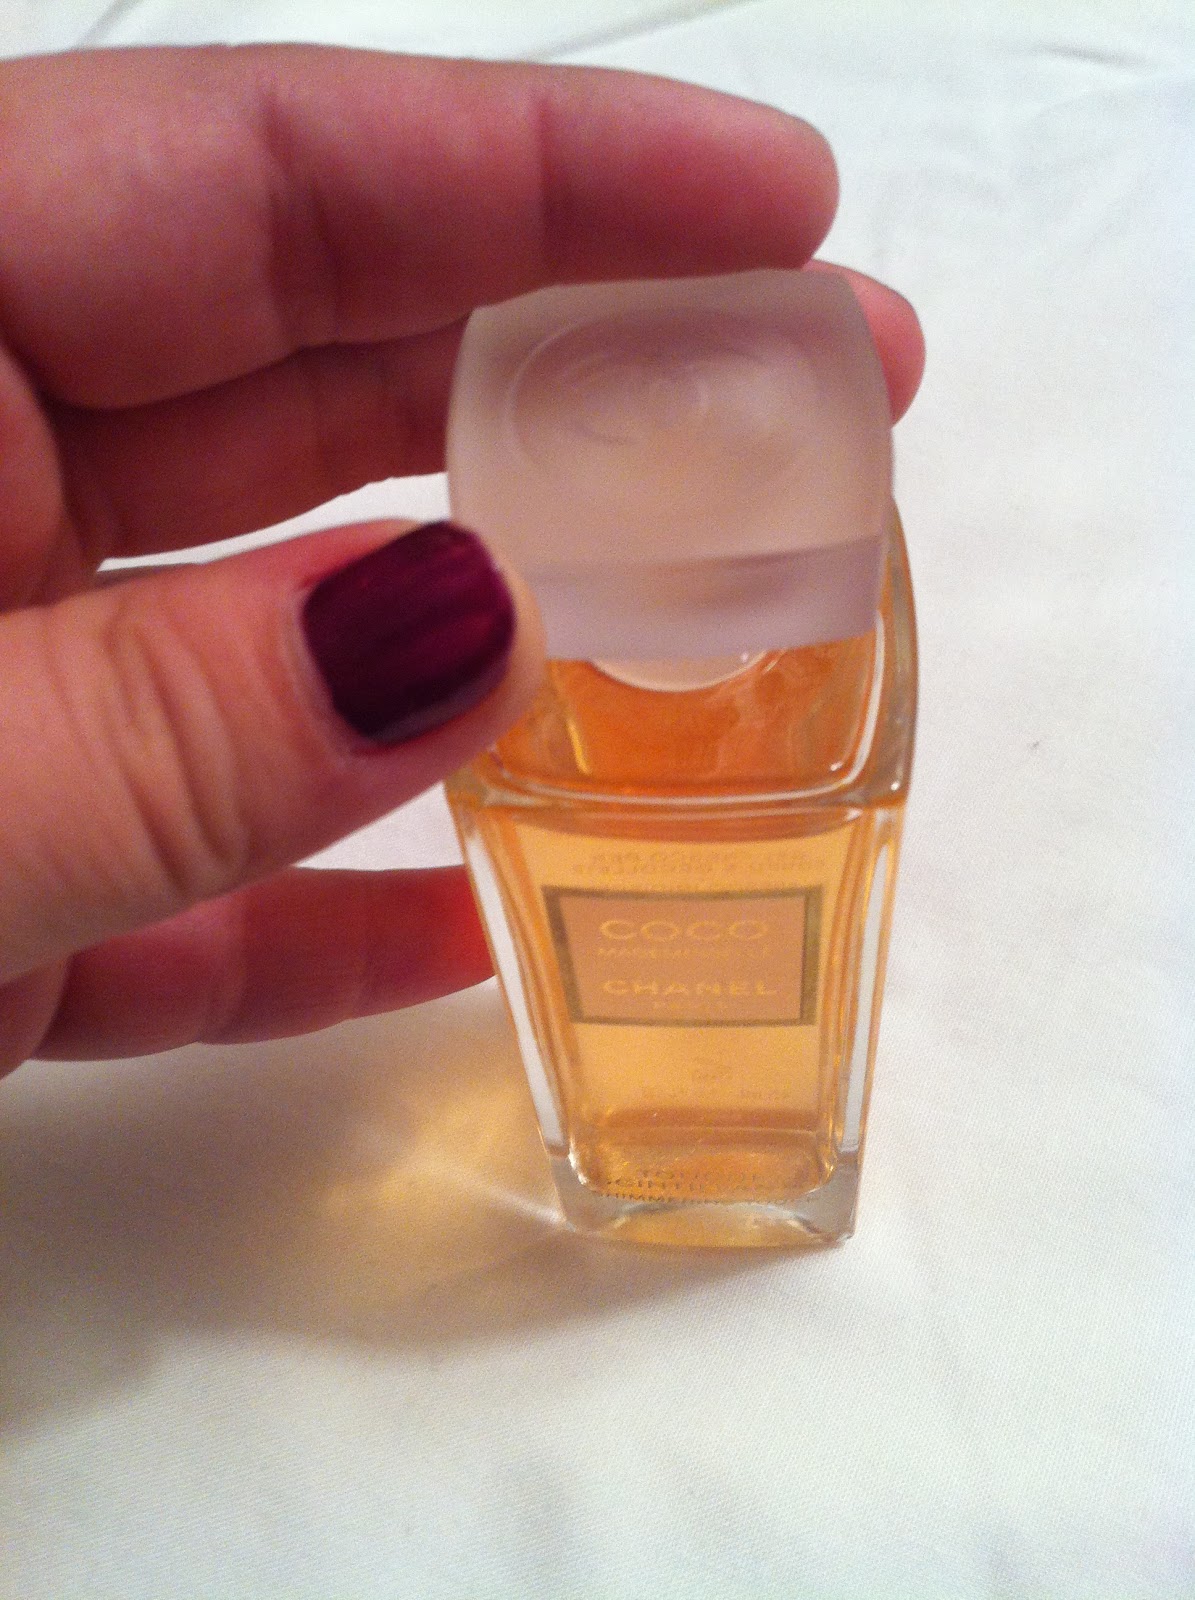 Beauty Banter: Beauty Review: Chanel Coco Mademoiselle Touche Scintillante